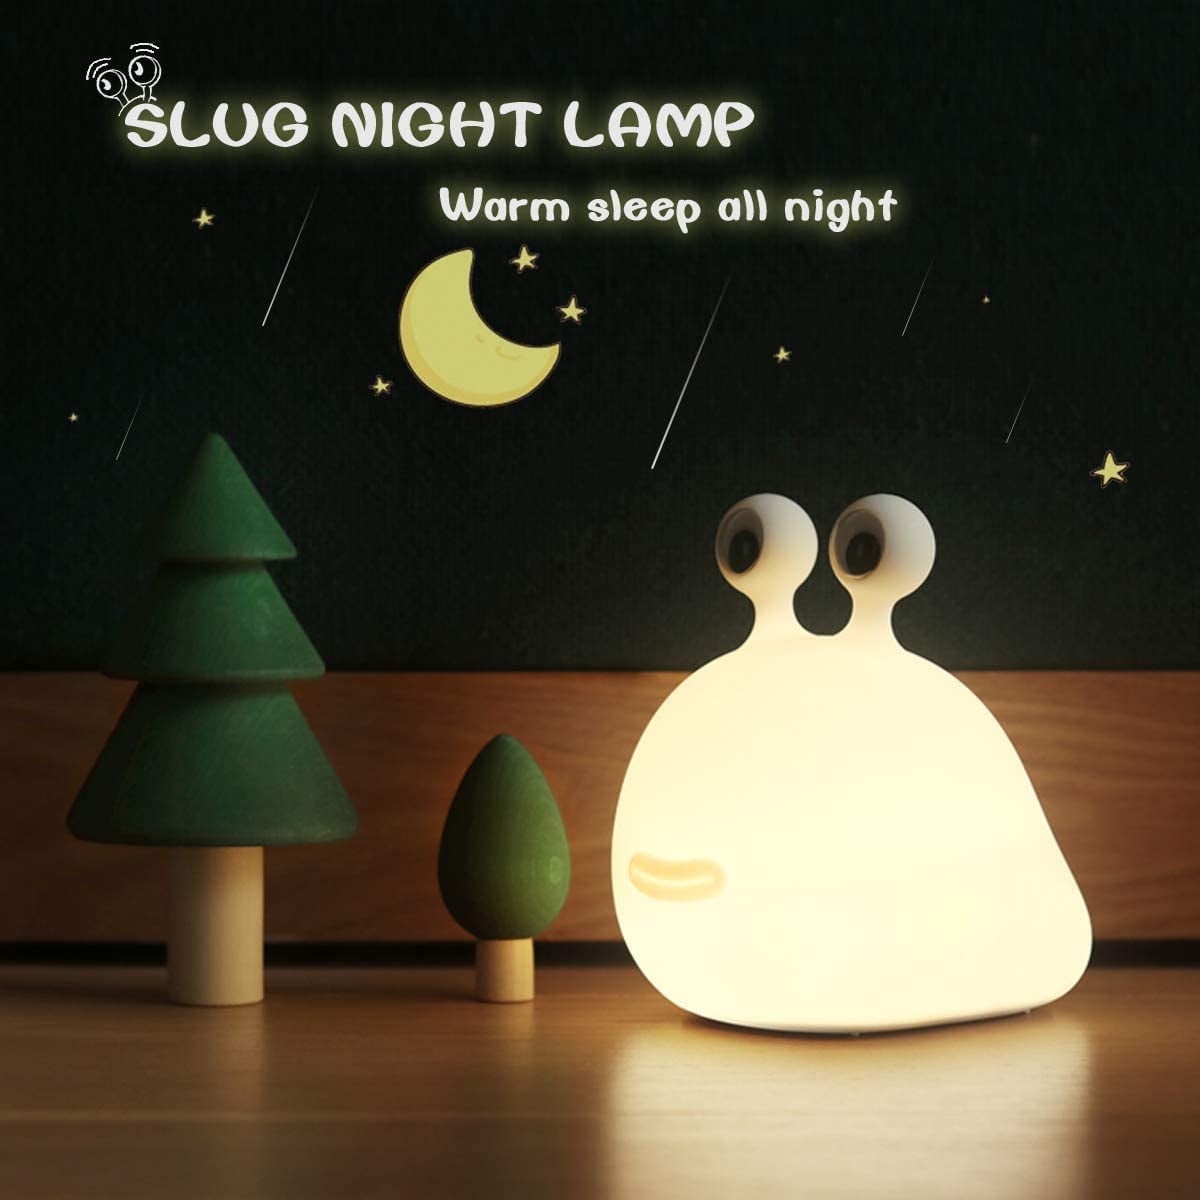 Details about   Cute Squishy  Night Light Silicon Pets Nursery Color Changing LED Decor Sleep 